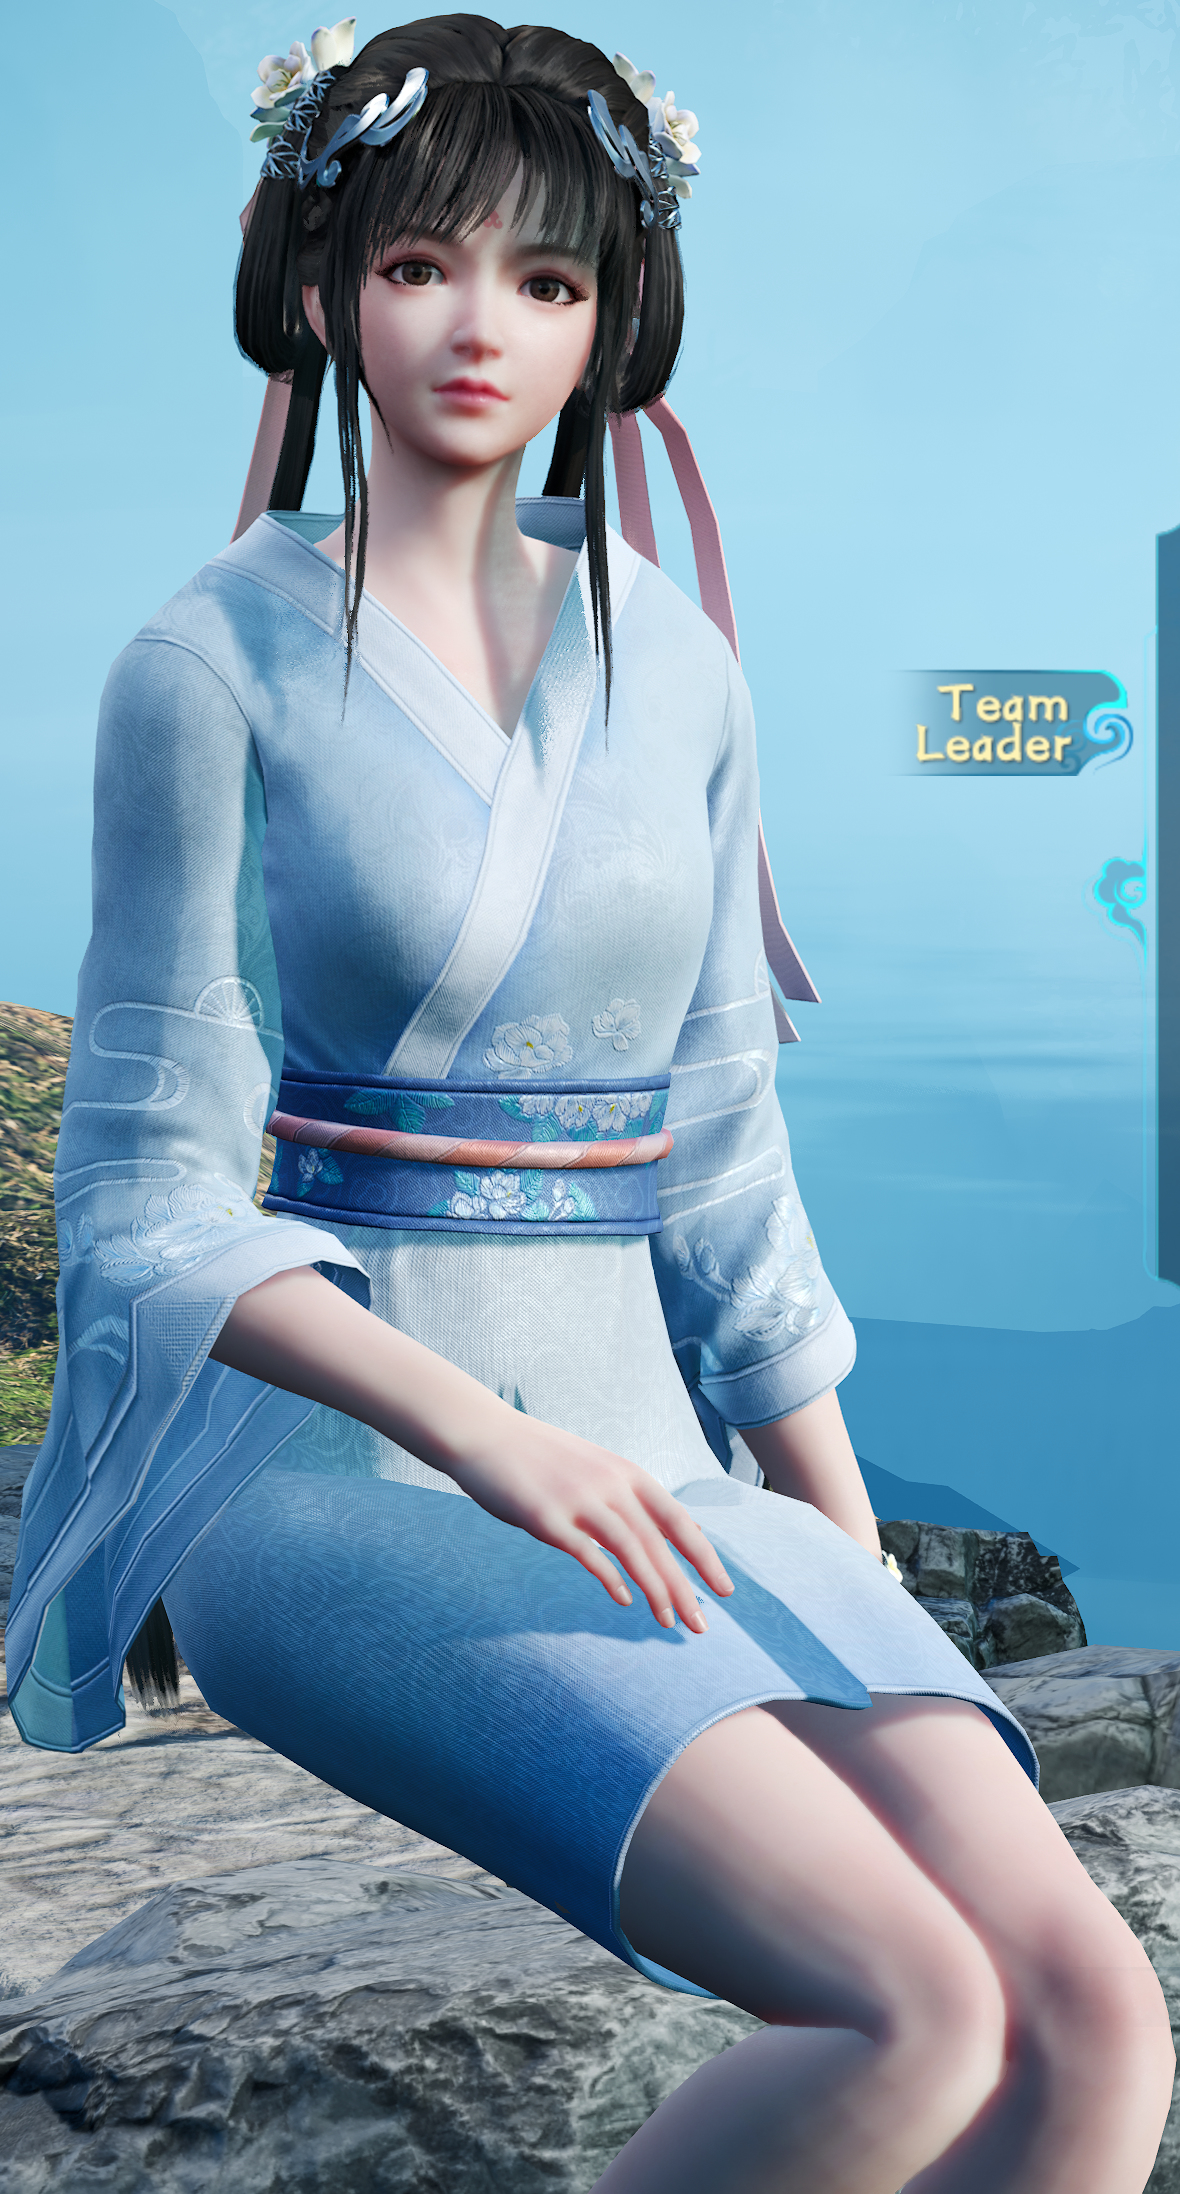 Bai Moqing default outfit mod: Less clothing image 3